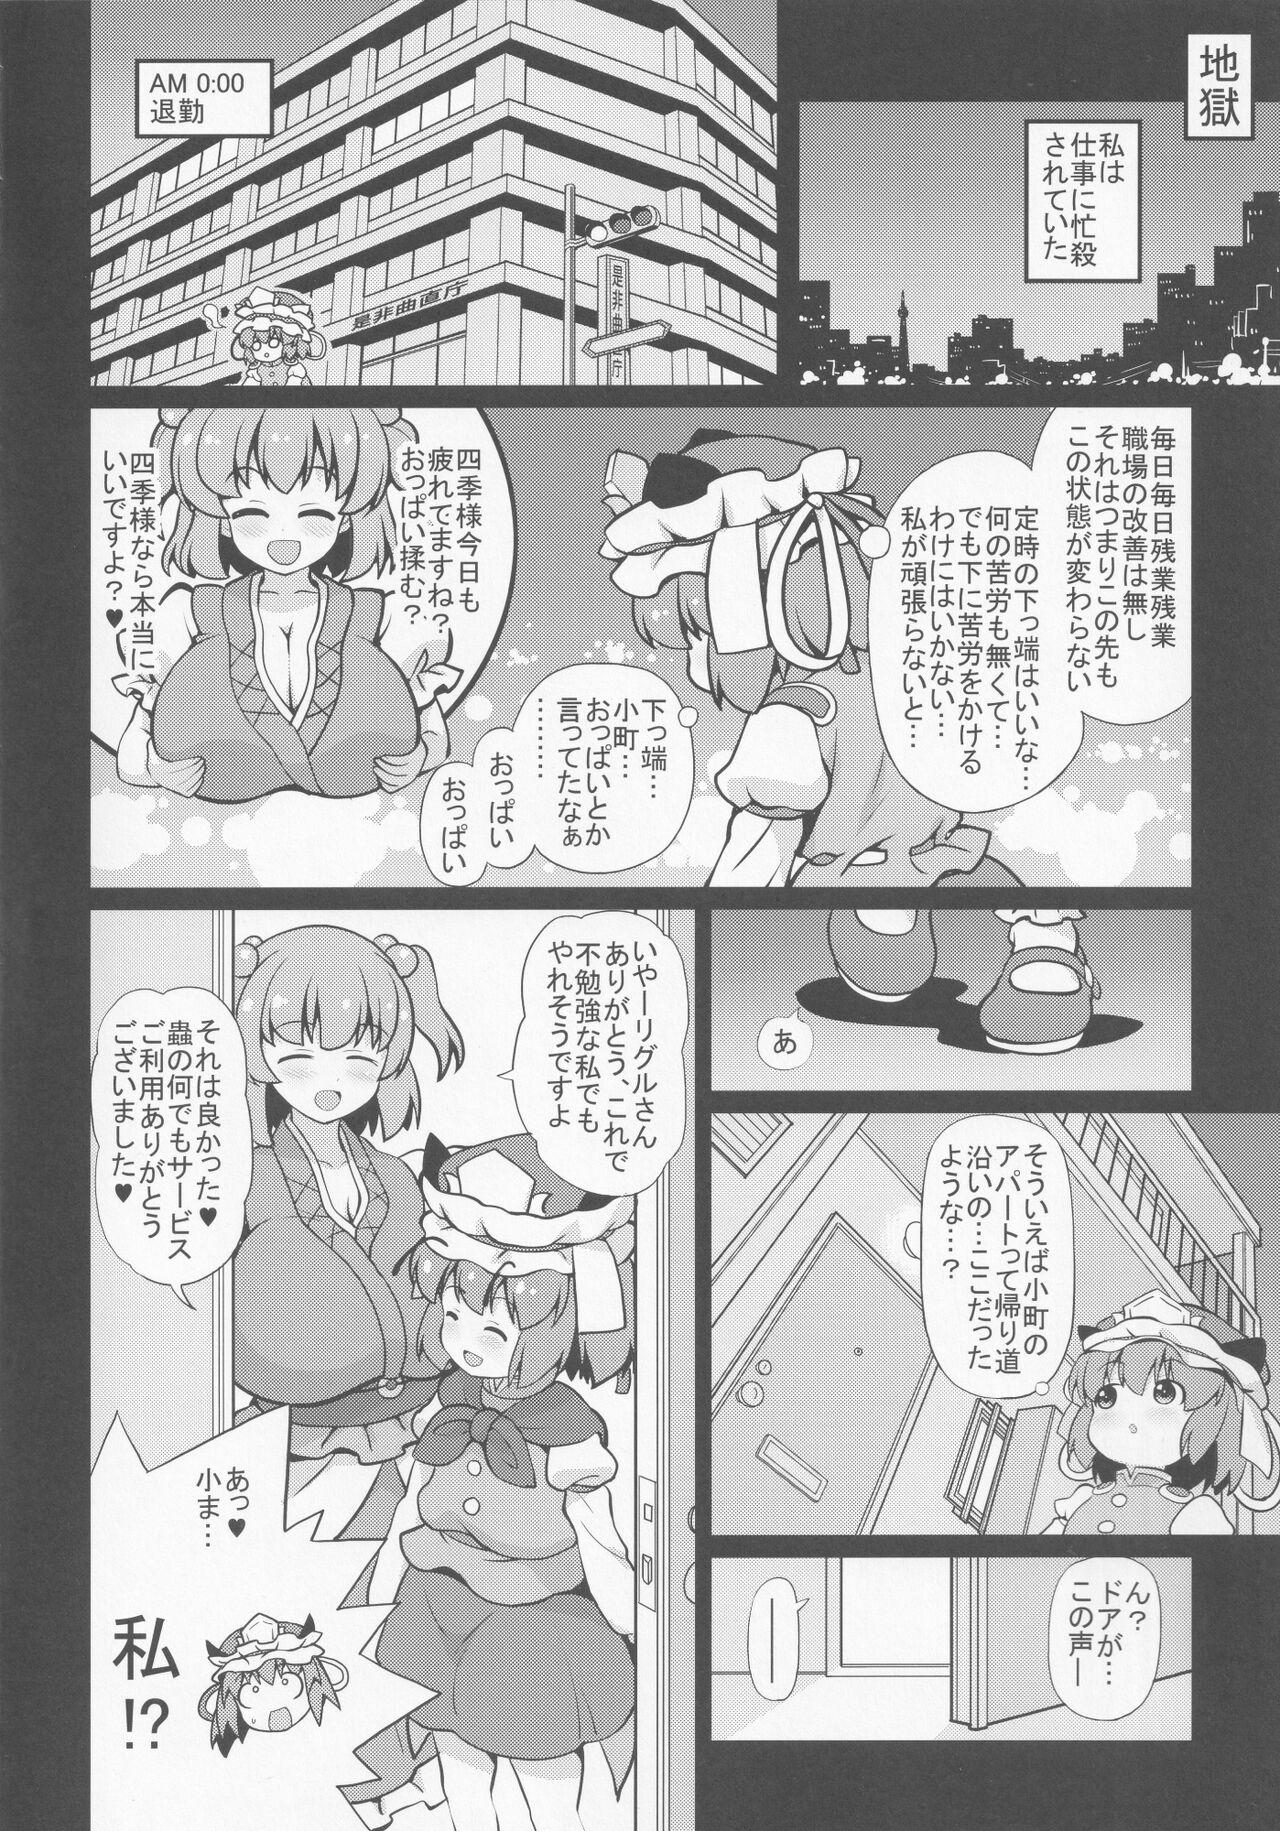 Blowjob gray out - Touhou project Thai - Page 5